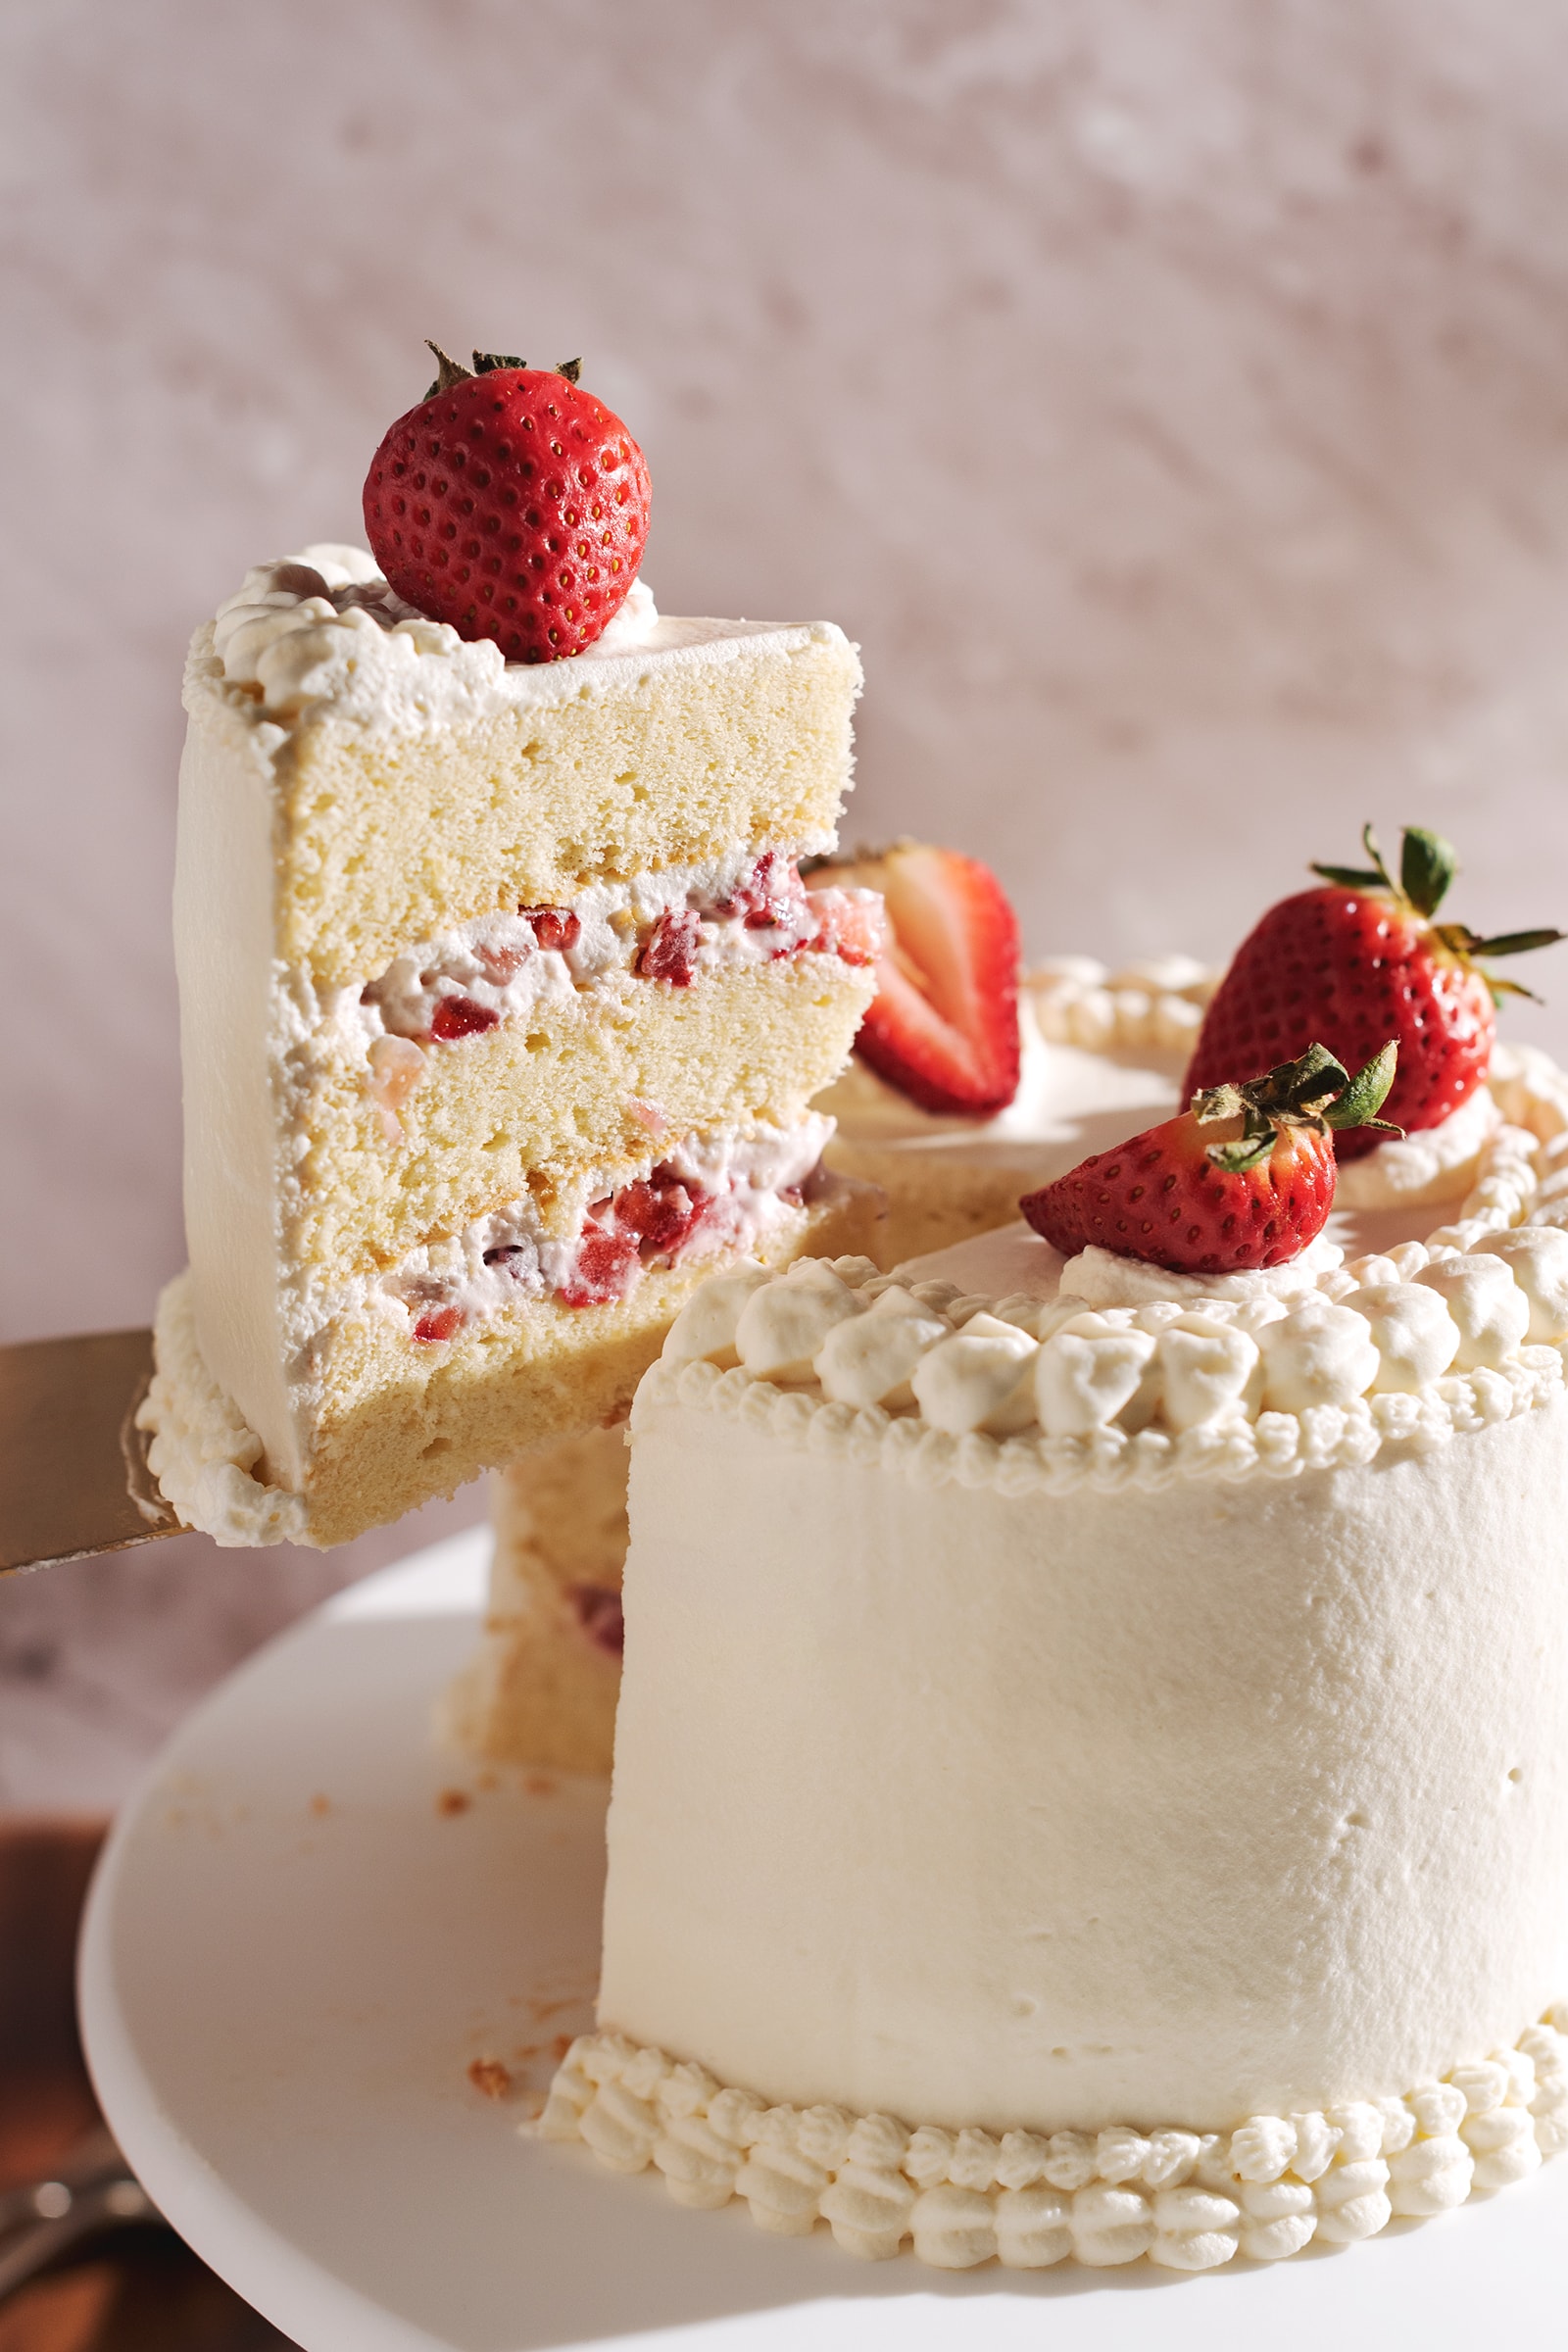 A slice of strawberry chiffon cake lifted above the rest of the cake with a cake server.